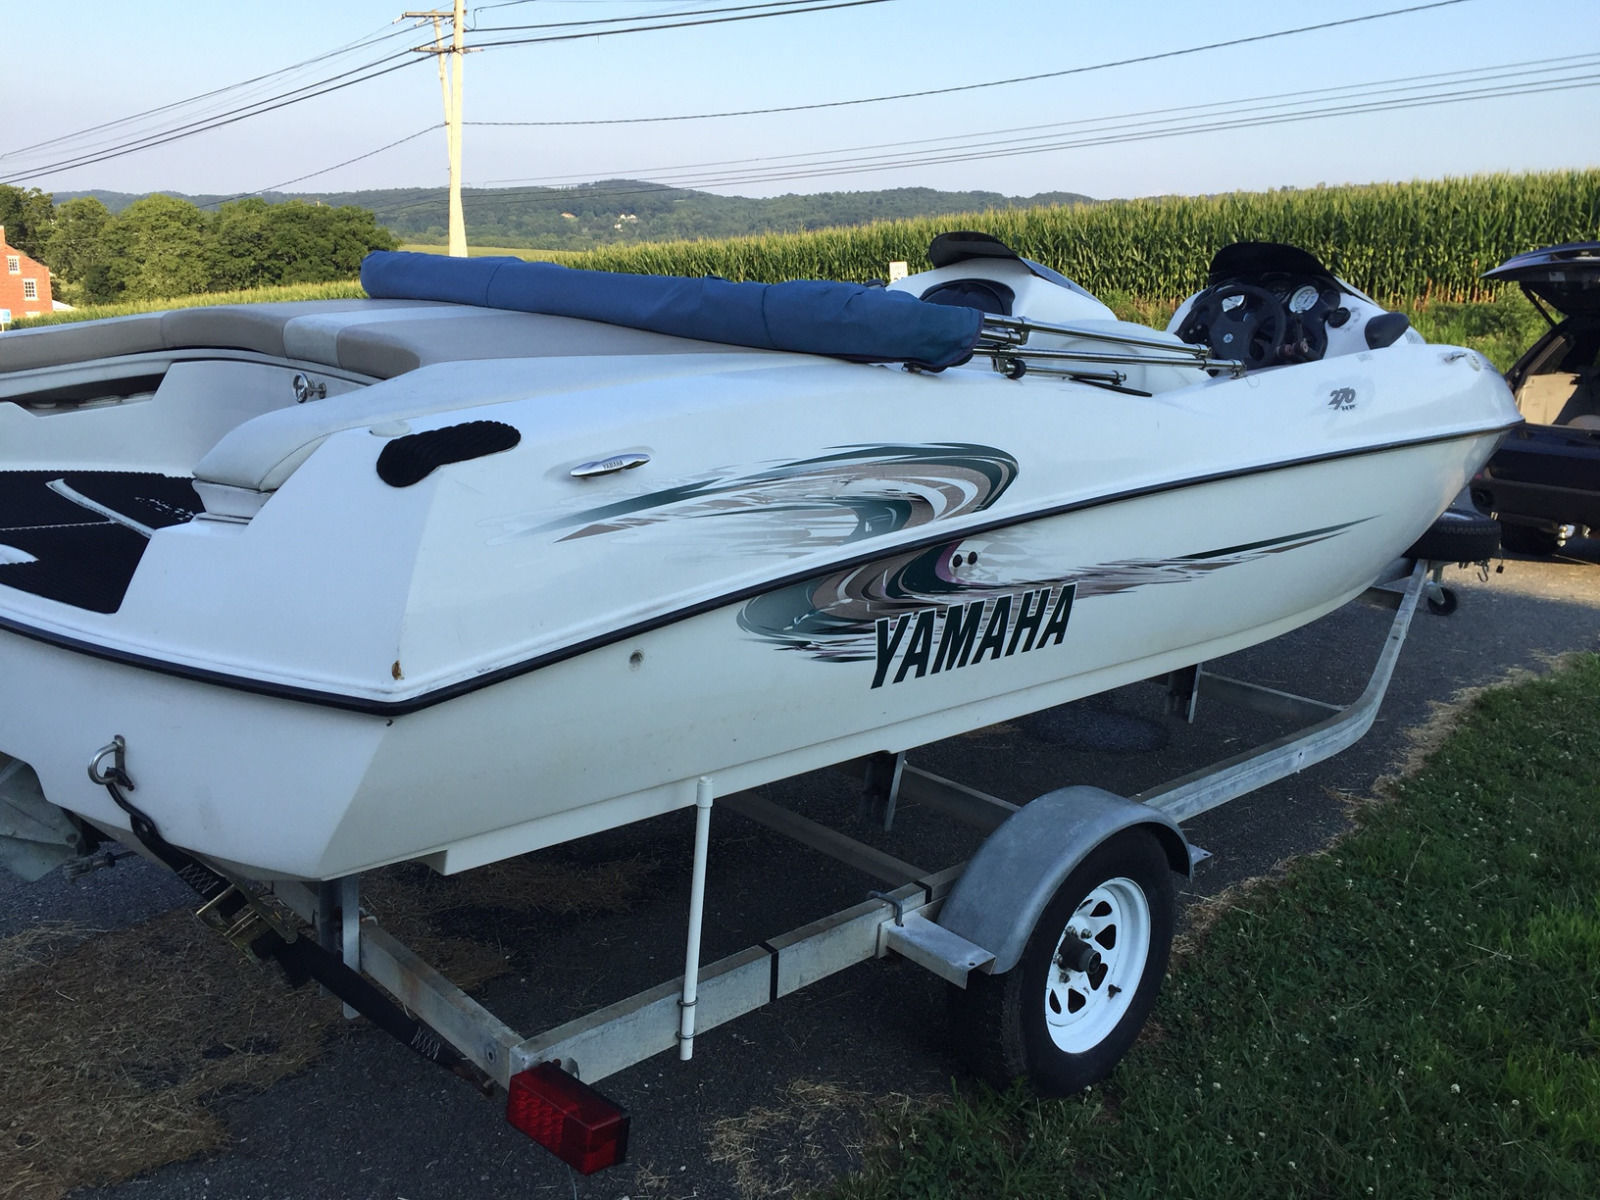 Yamaha Ls2000 Boat For Sale From Usa